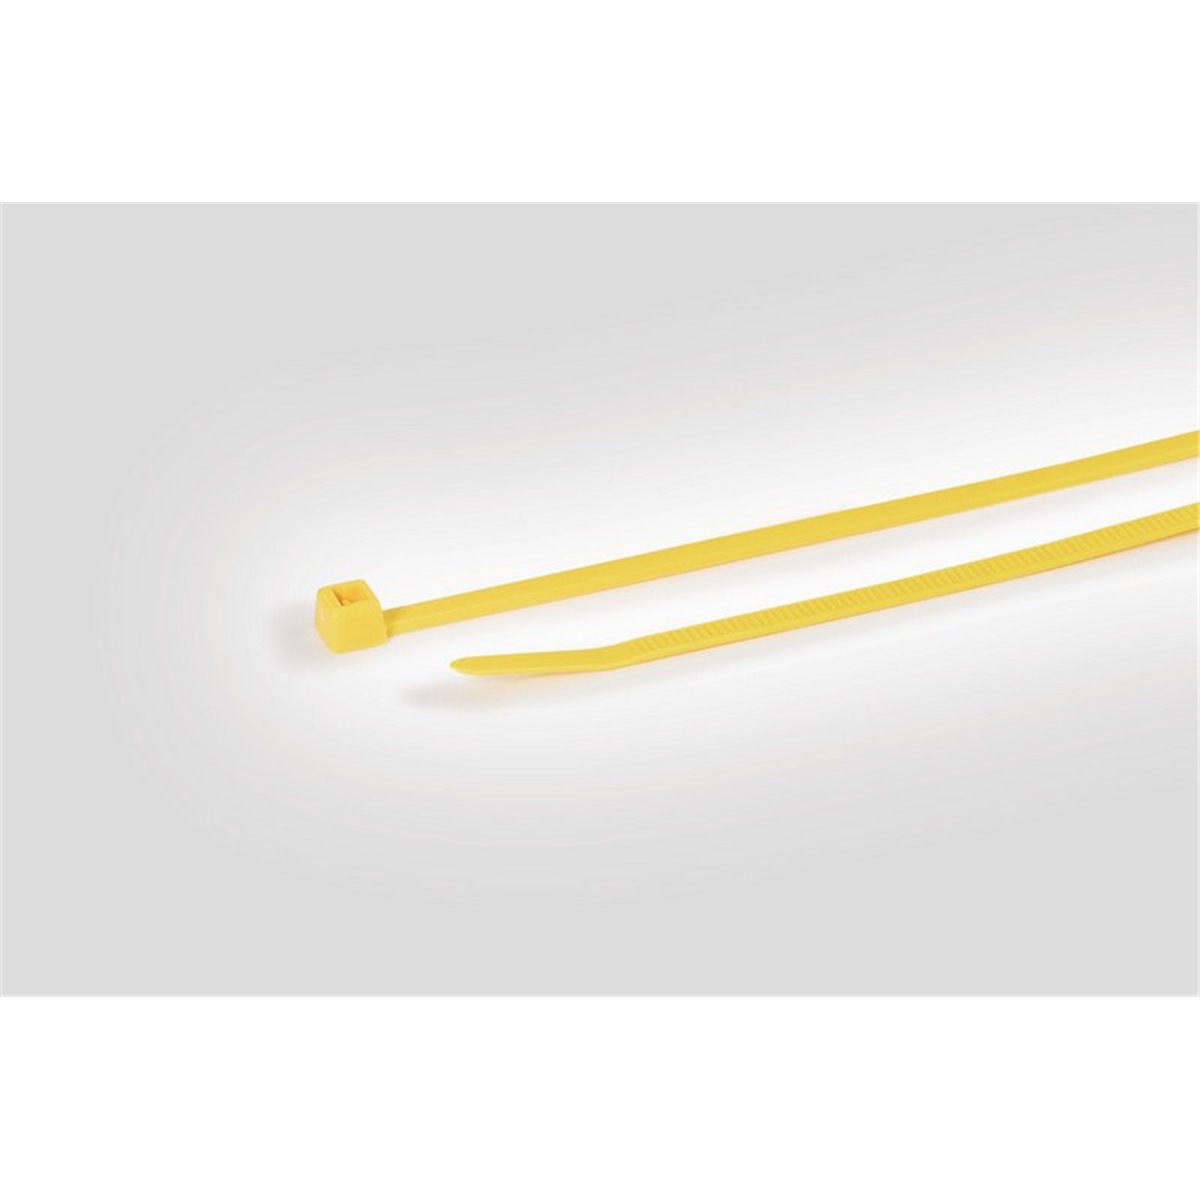 Cable tie T50R-PA66-YE, 4.6x200mm, yellow, 100 pcs. HellermannTyton